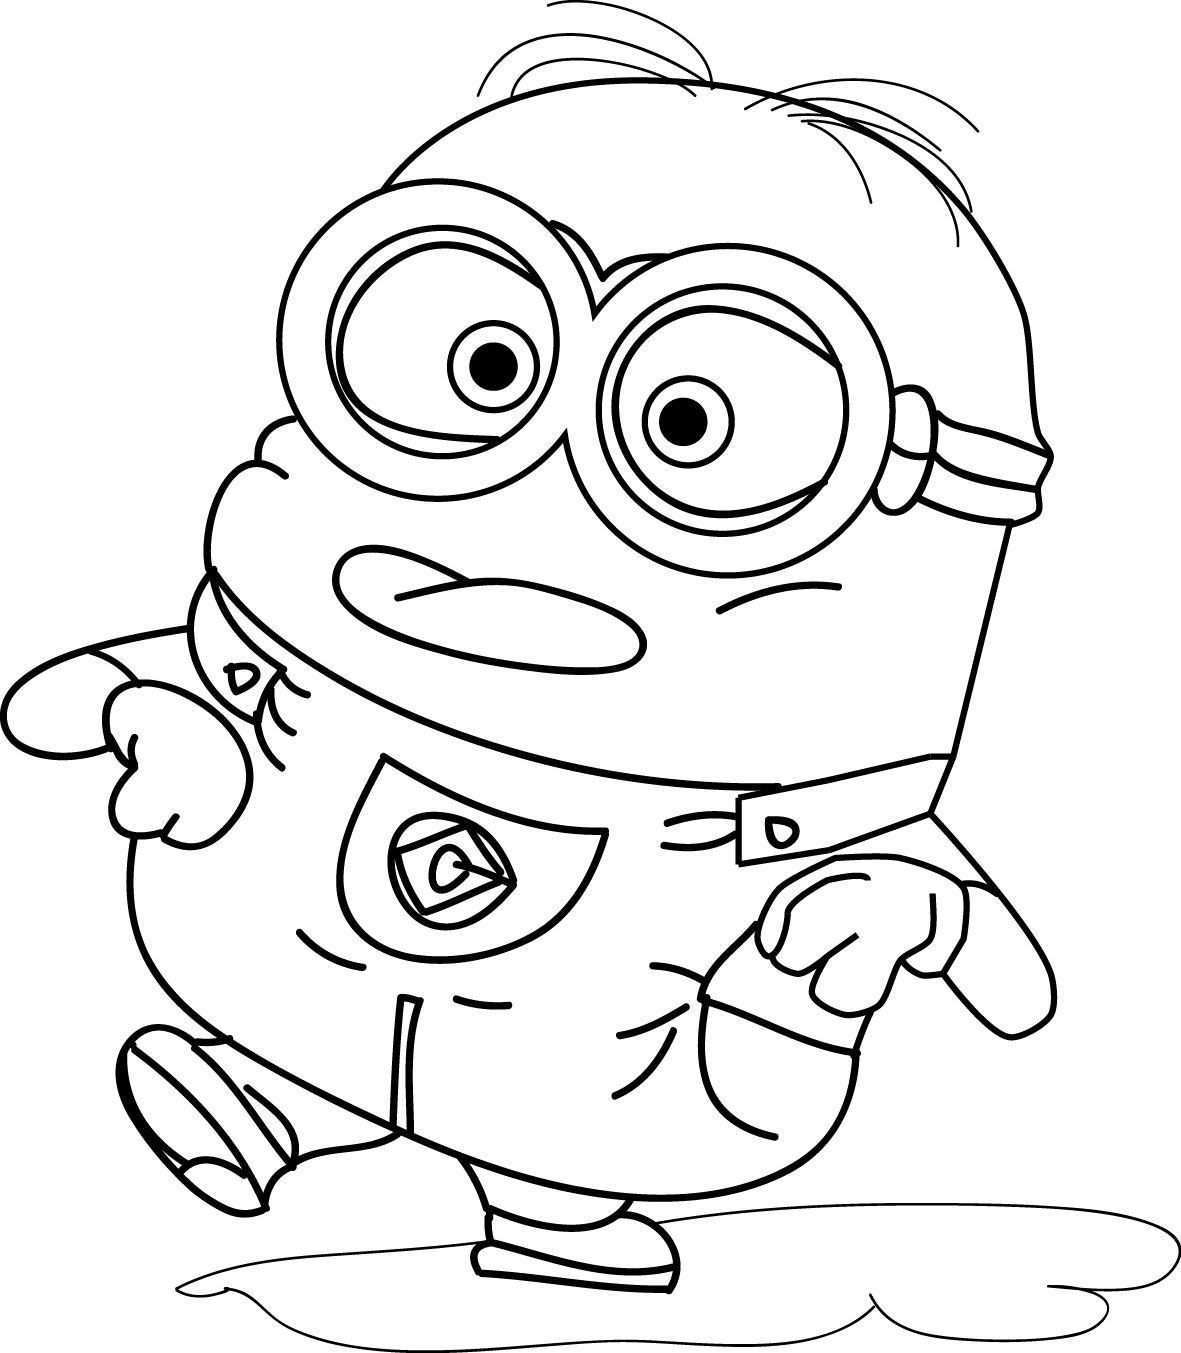 Minions Coloring Pages To Print Lovely Minion Coloring Pages Dr Odd Babysitting In 20